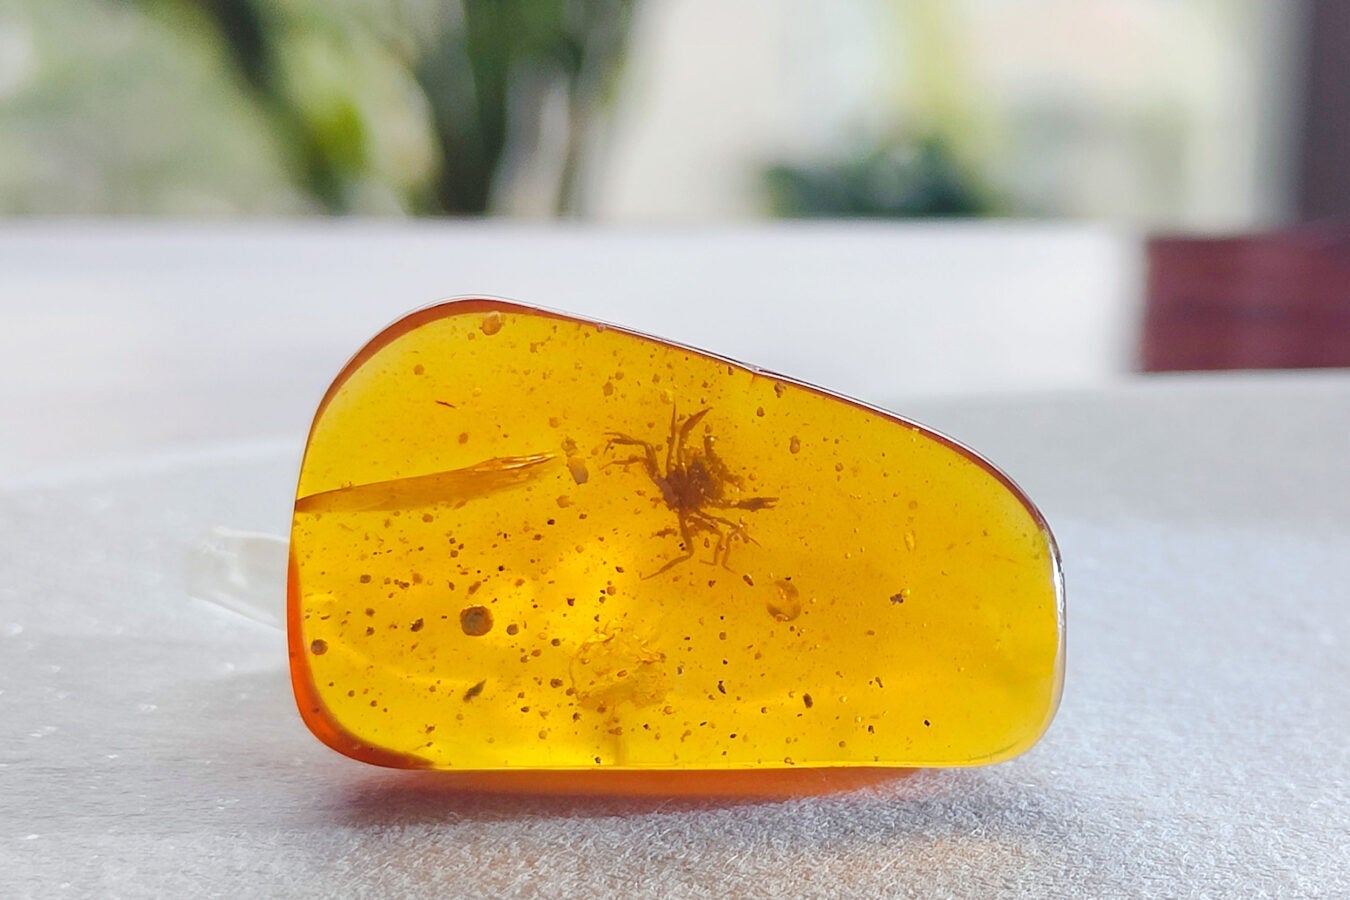 The first crab in amber from the dinosaur era.